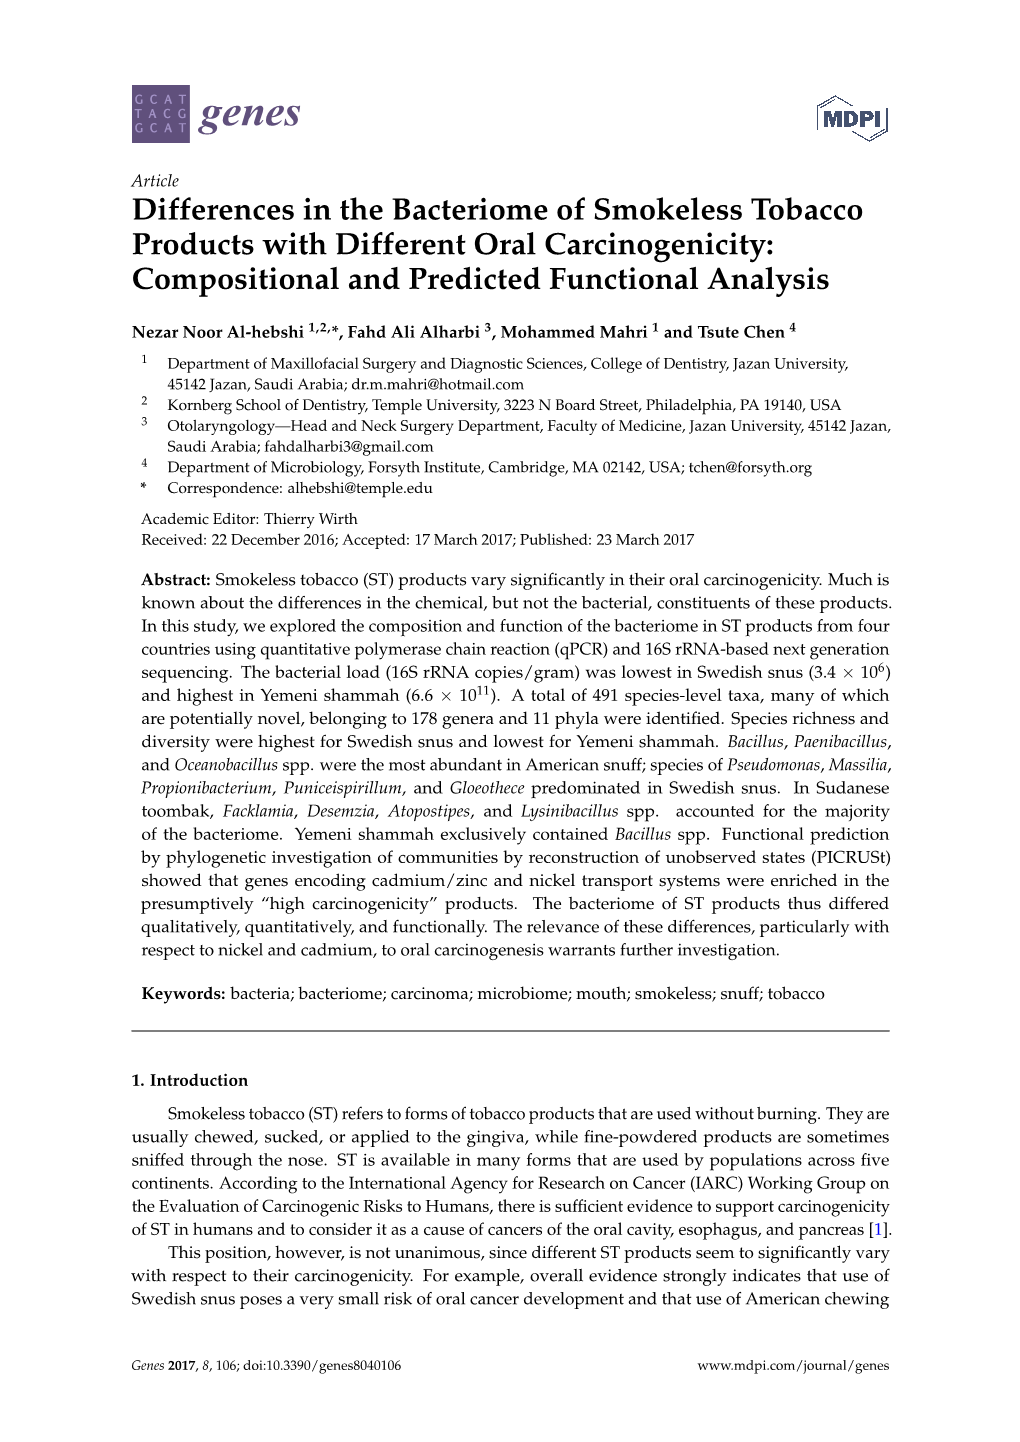 Differences in the Bacteriome of Smokeless Tobacco Products with Different Oral Carcinogenicity: Compositional and Predicted Functional Analysis